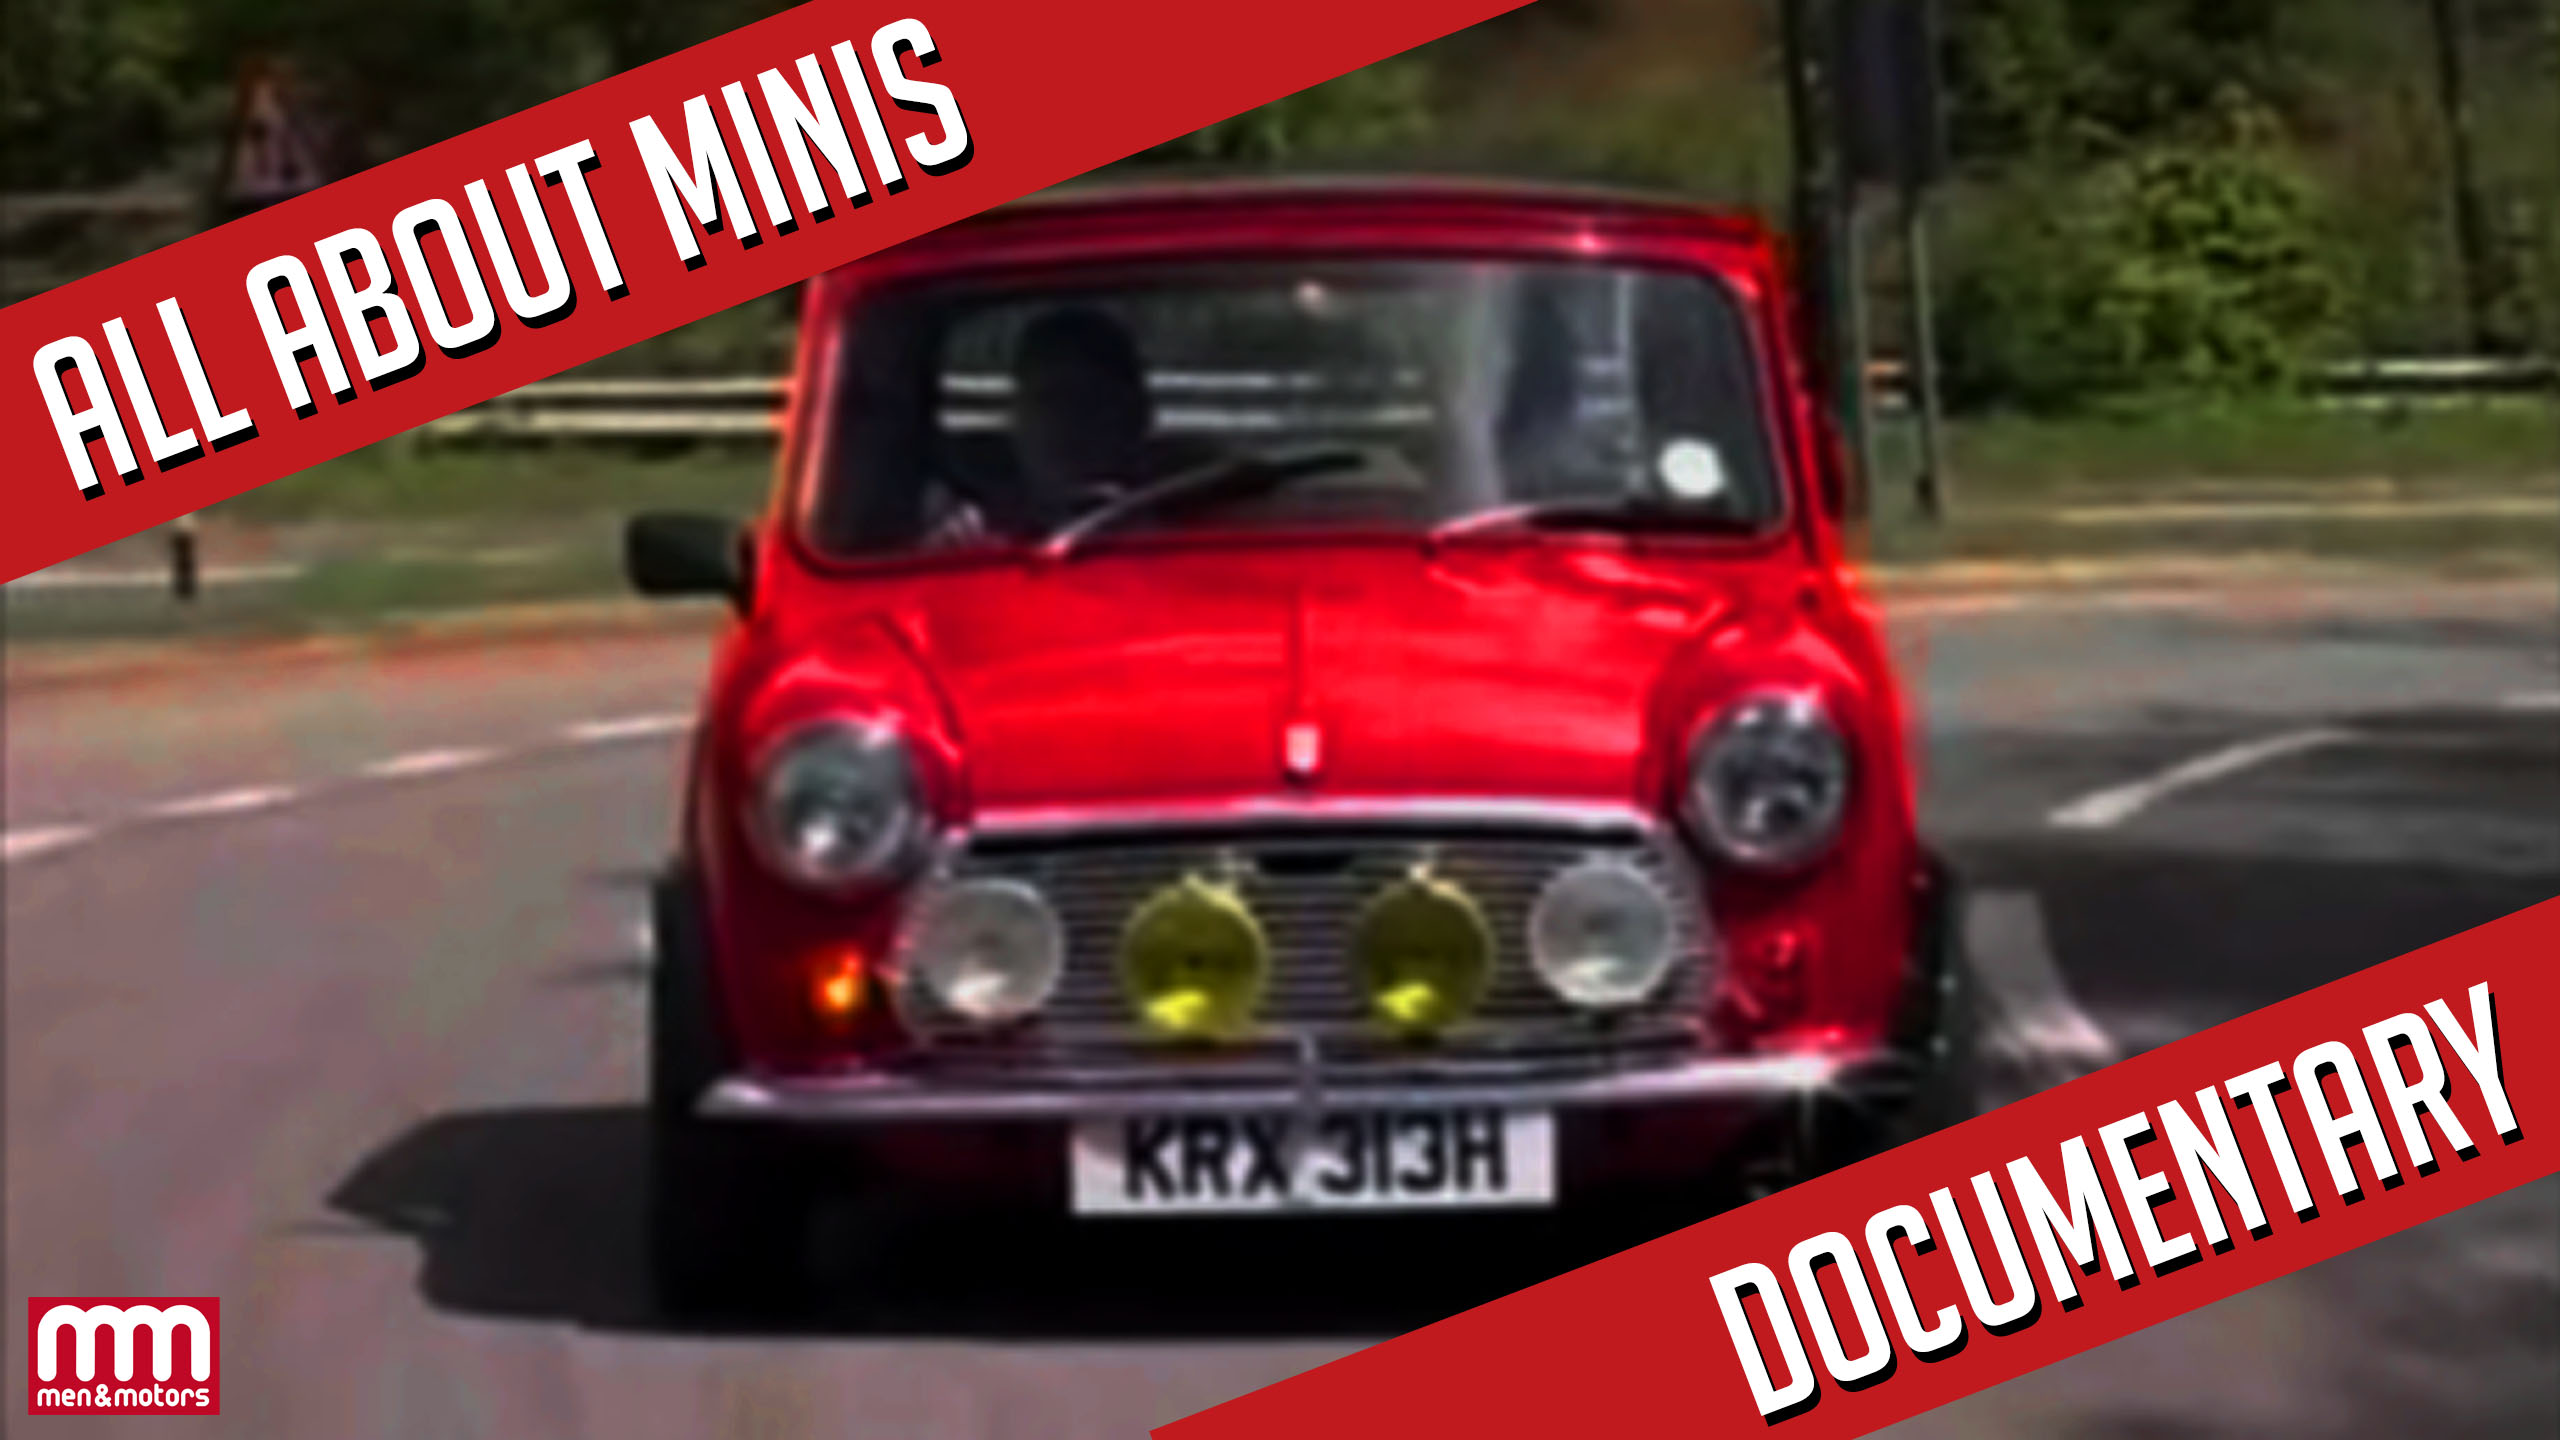 All about Minis – Documentary